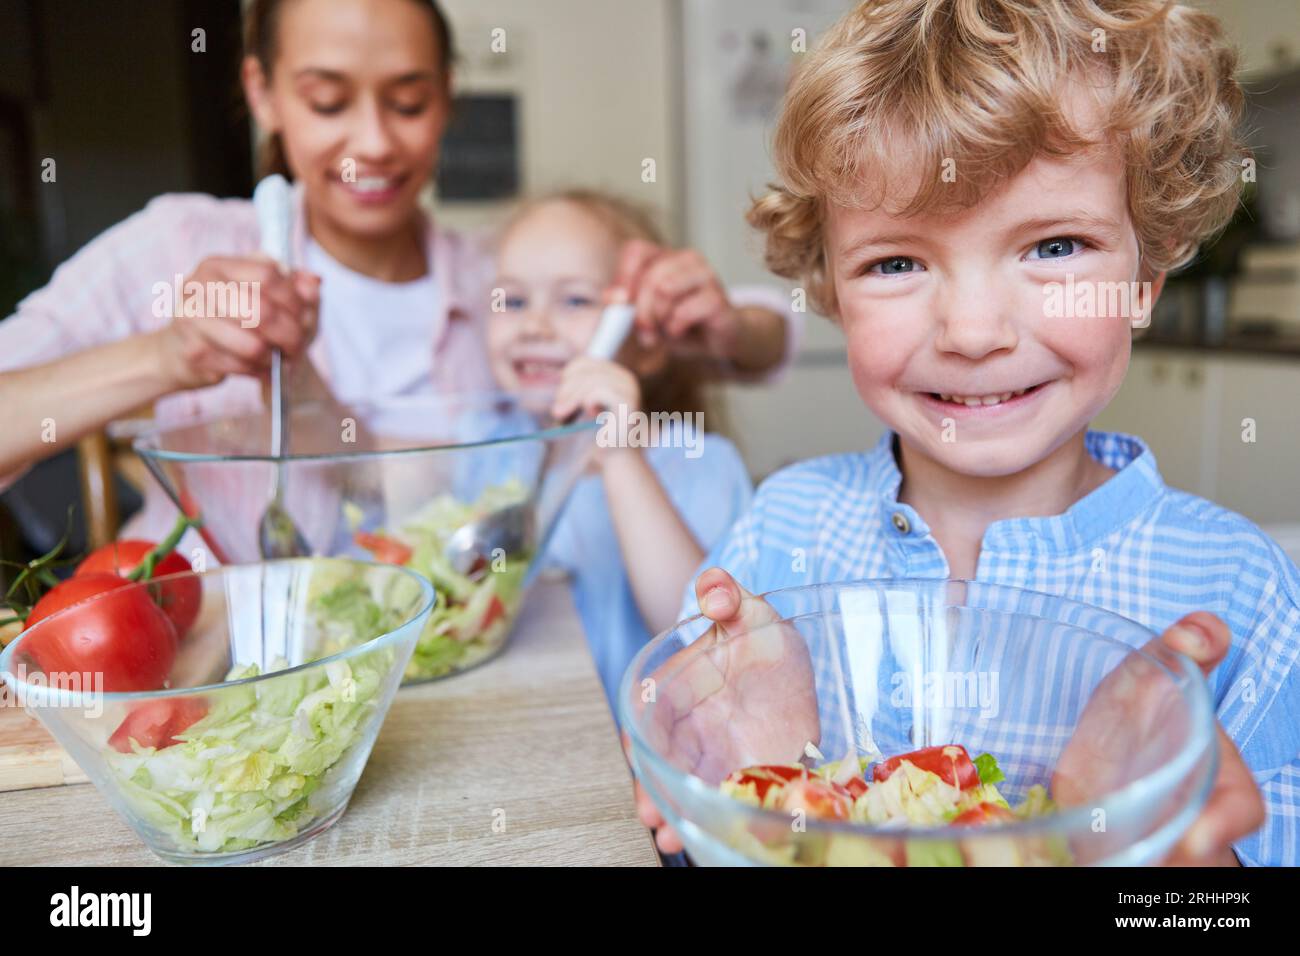 Portrait of smiling boy holding bowl with family preparing salad at home Stock Photo